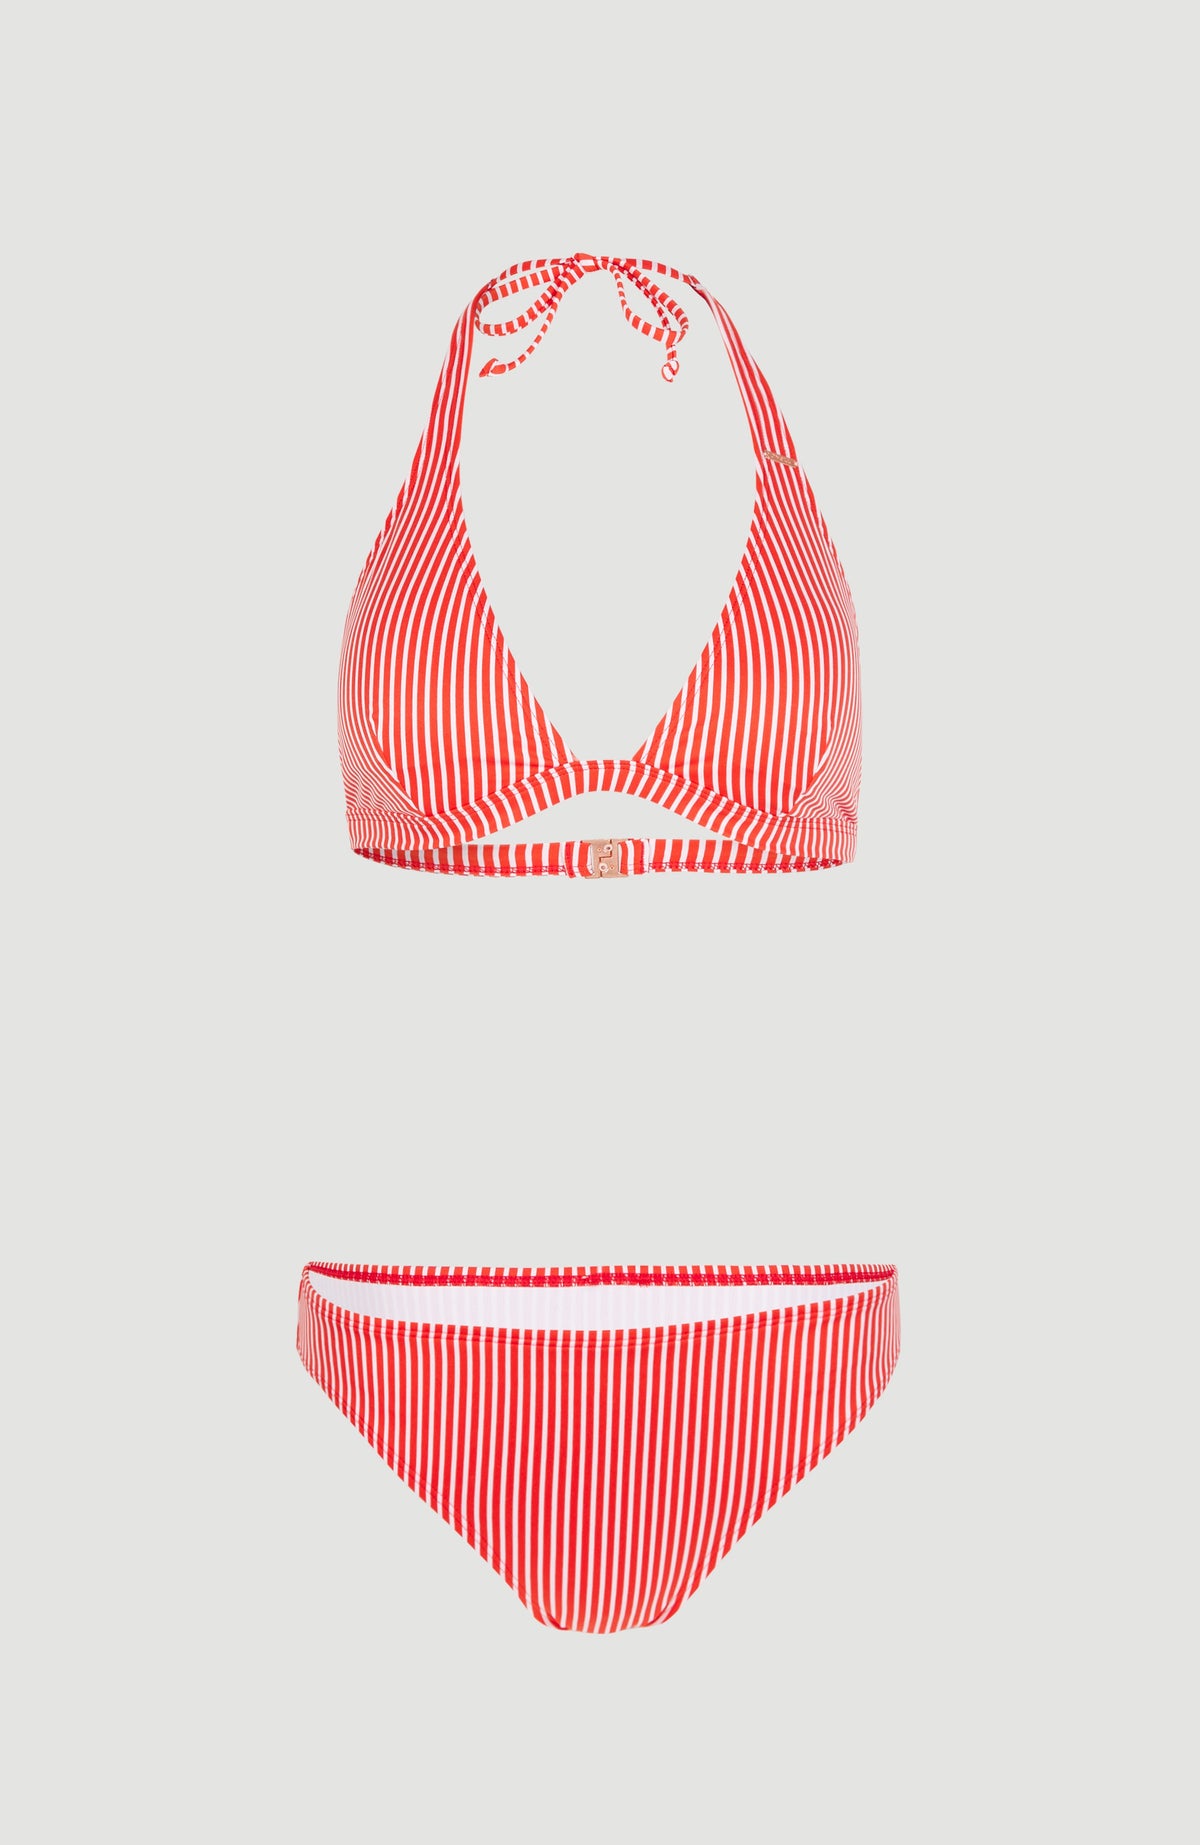 What is a tanga?  Thongs Fit and Style Guide by Marlies Dekkers